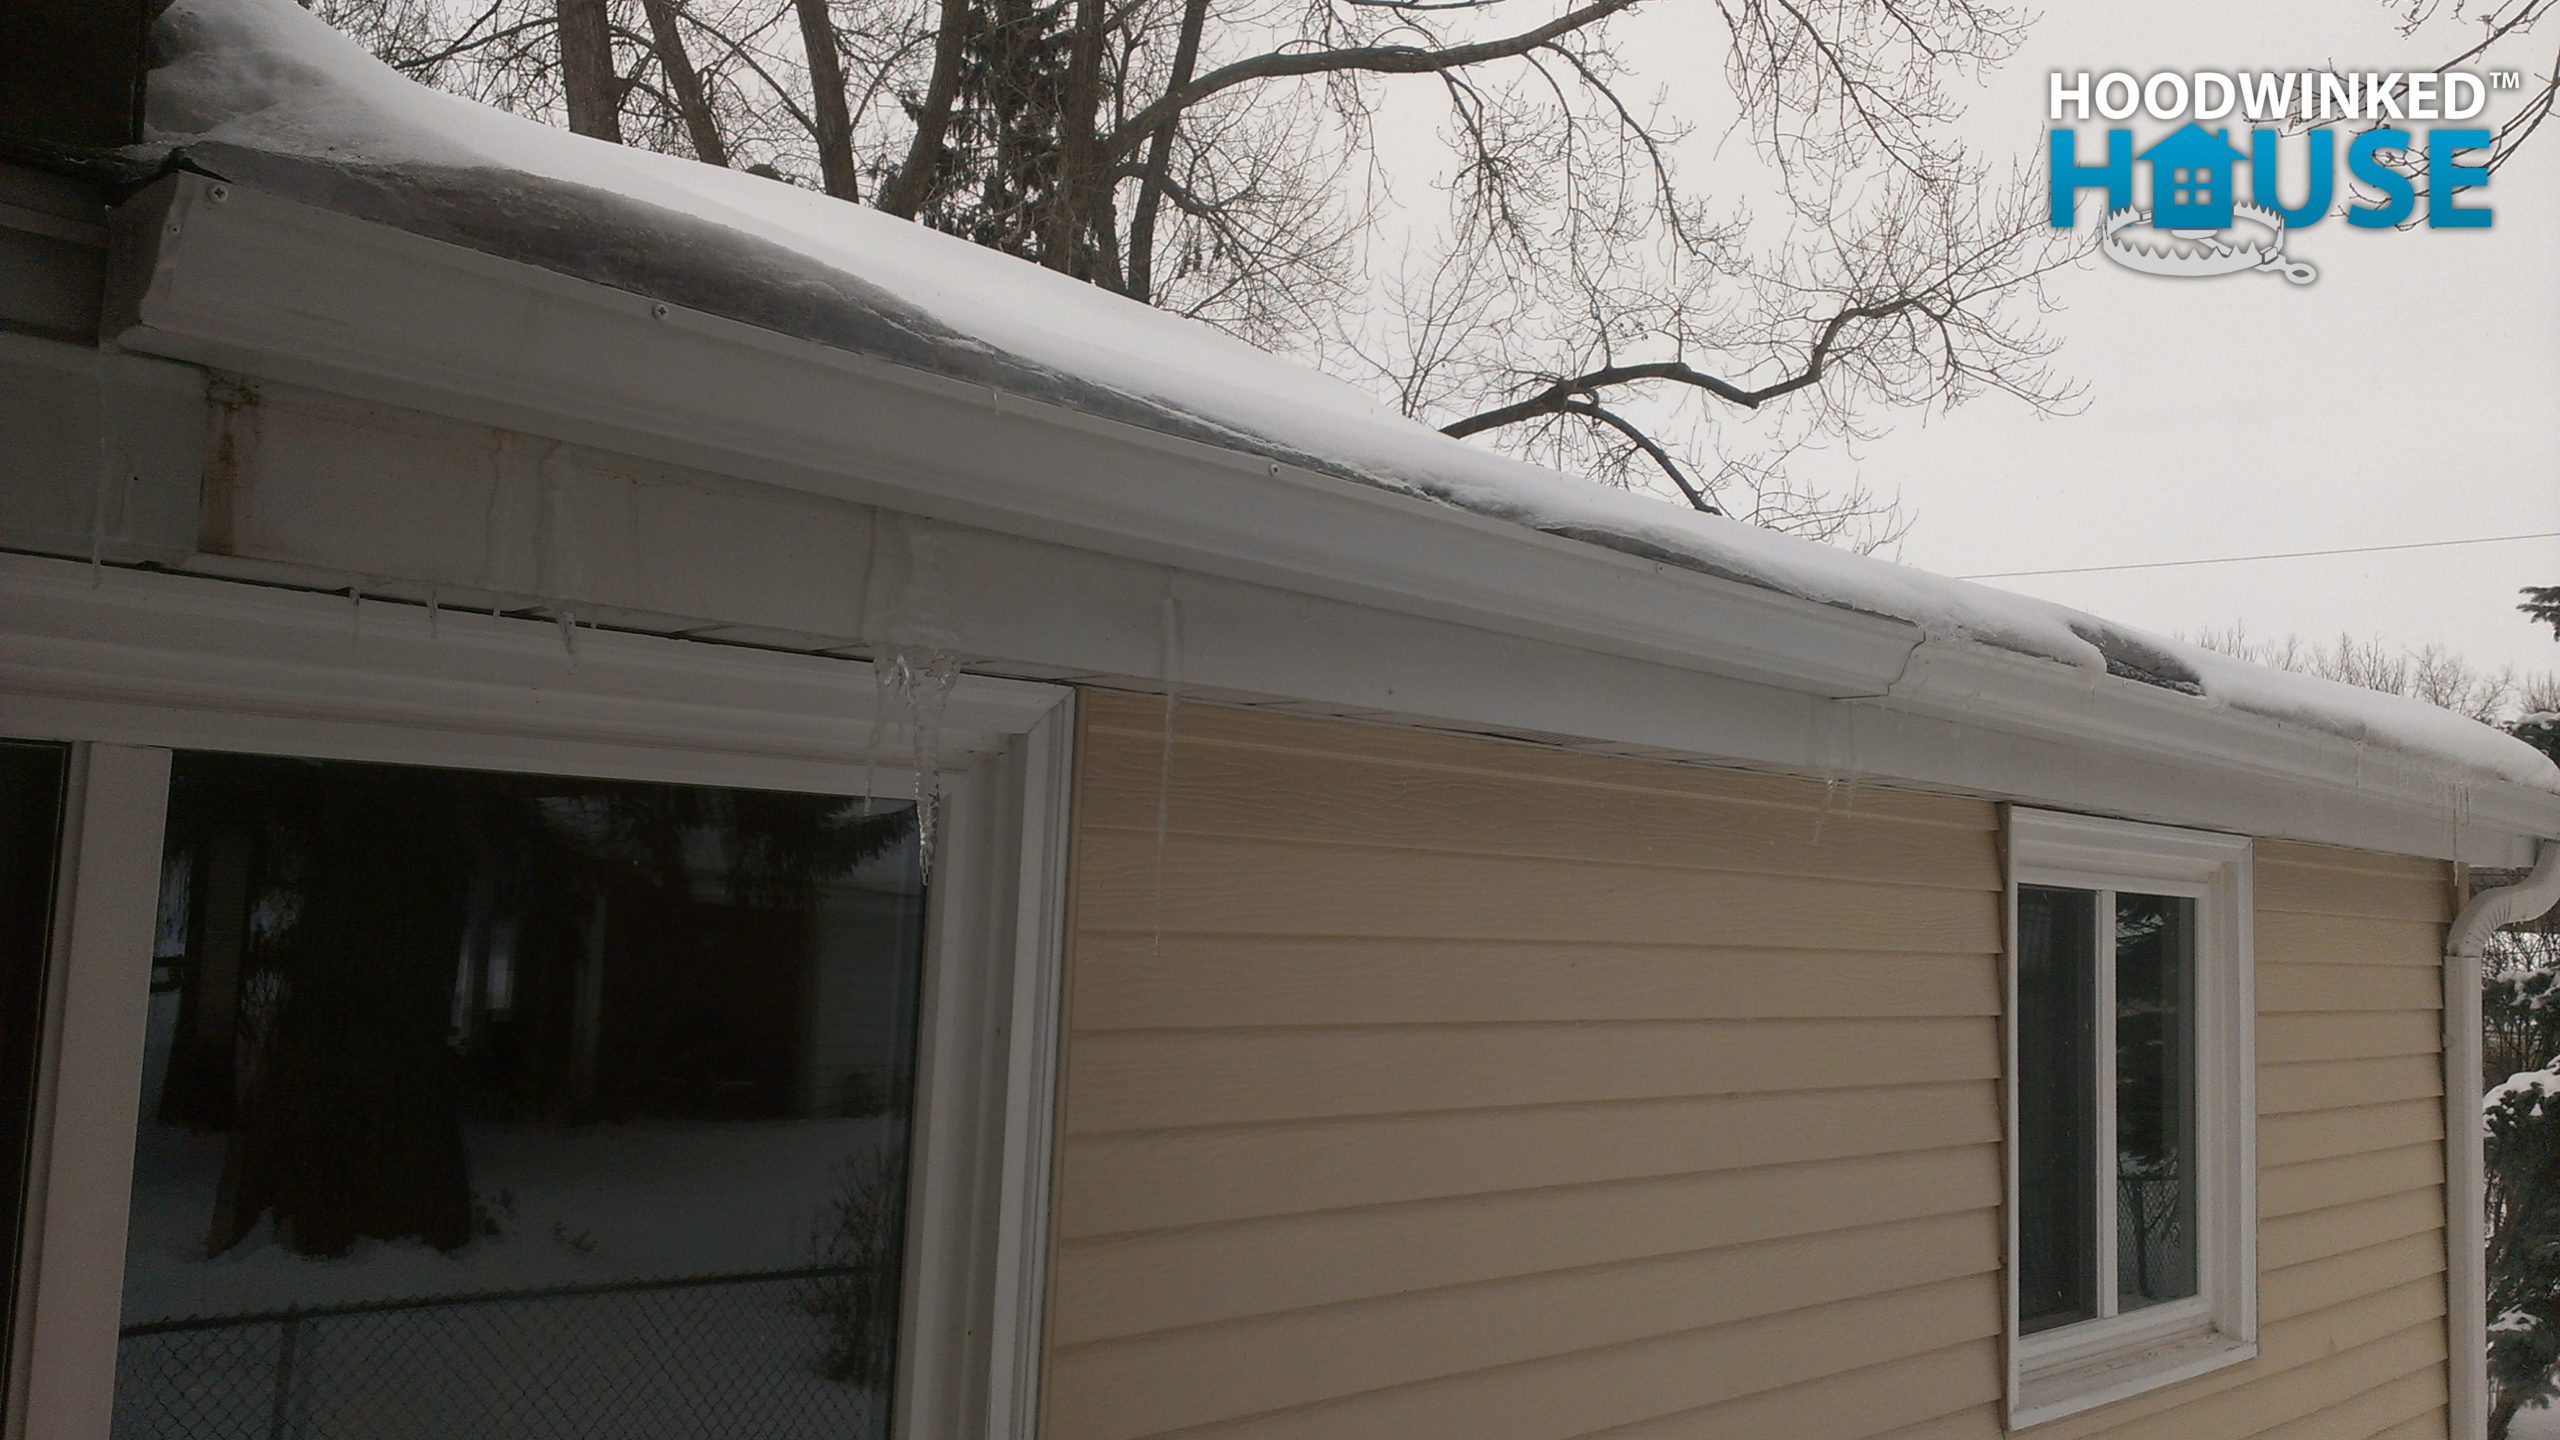 Icicles form beneath a snowy gutter that is forming ice dams.